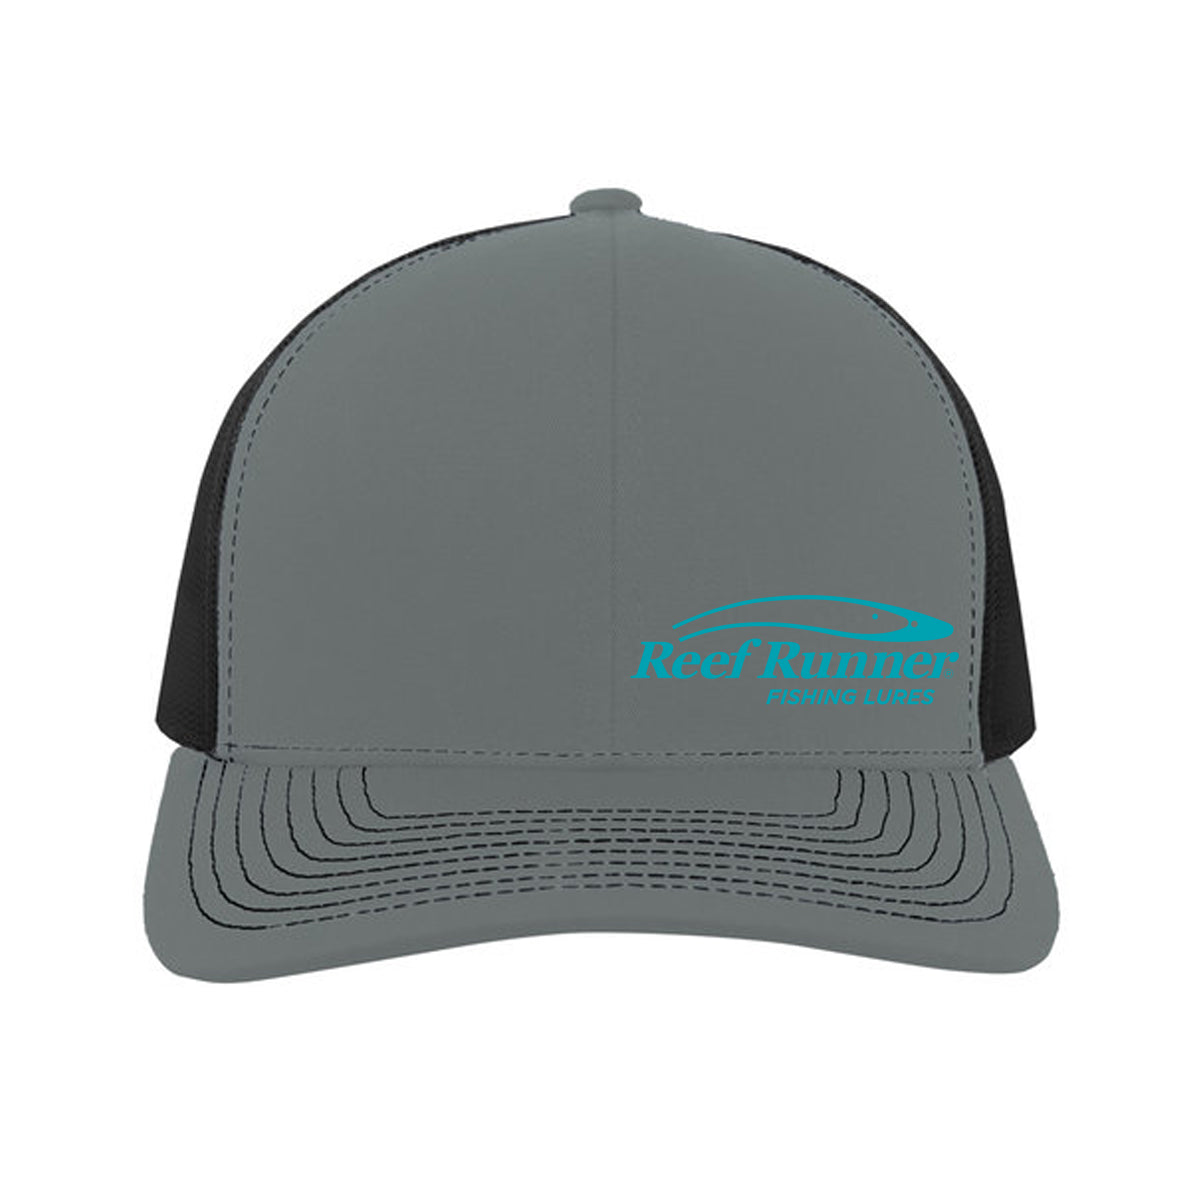 Stocking Hat [NWM Hat] - $10.99 : Fishing Tackle - Lures & Jigs